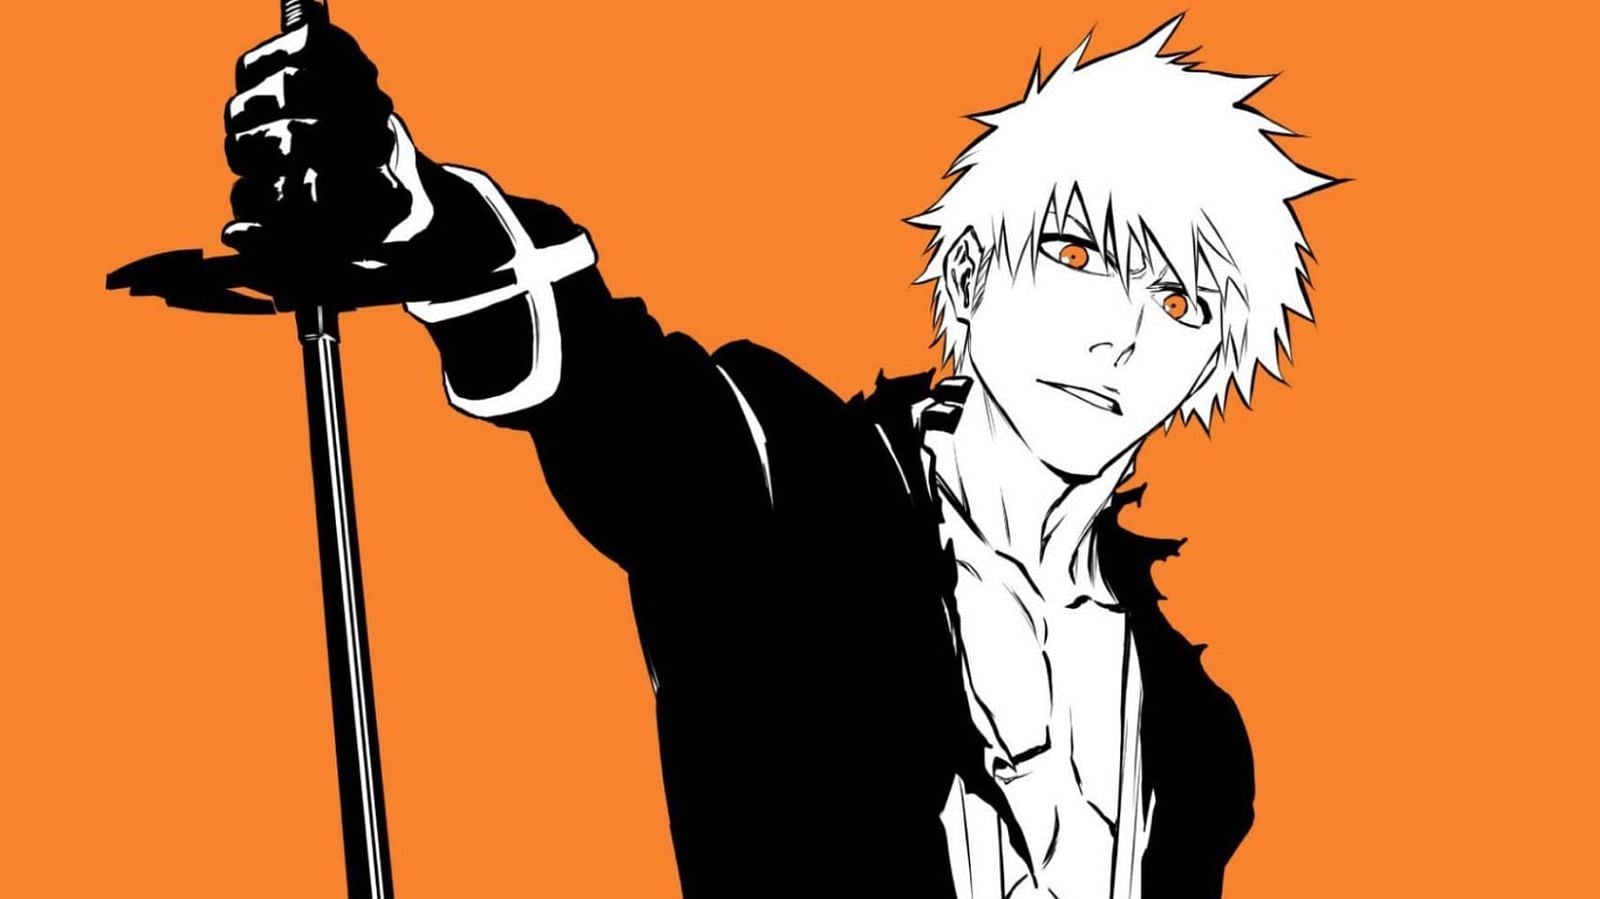 I just finished the anime Bleach and want more. Where should I start the  manga? - Quora